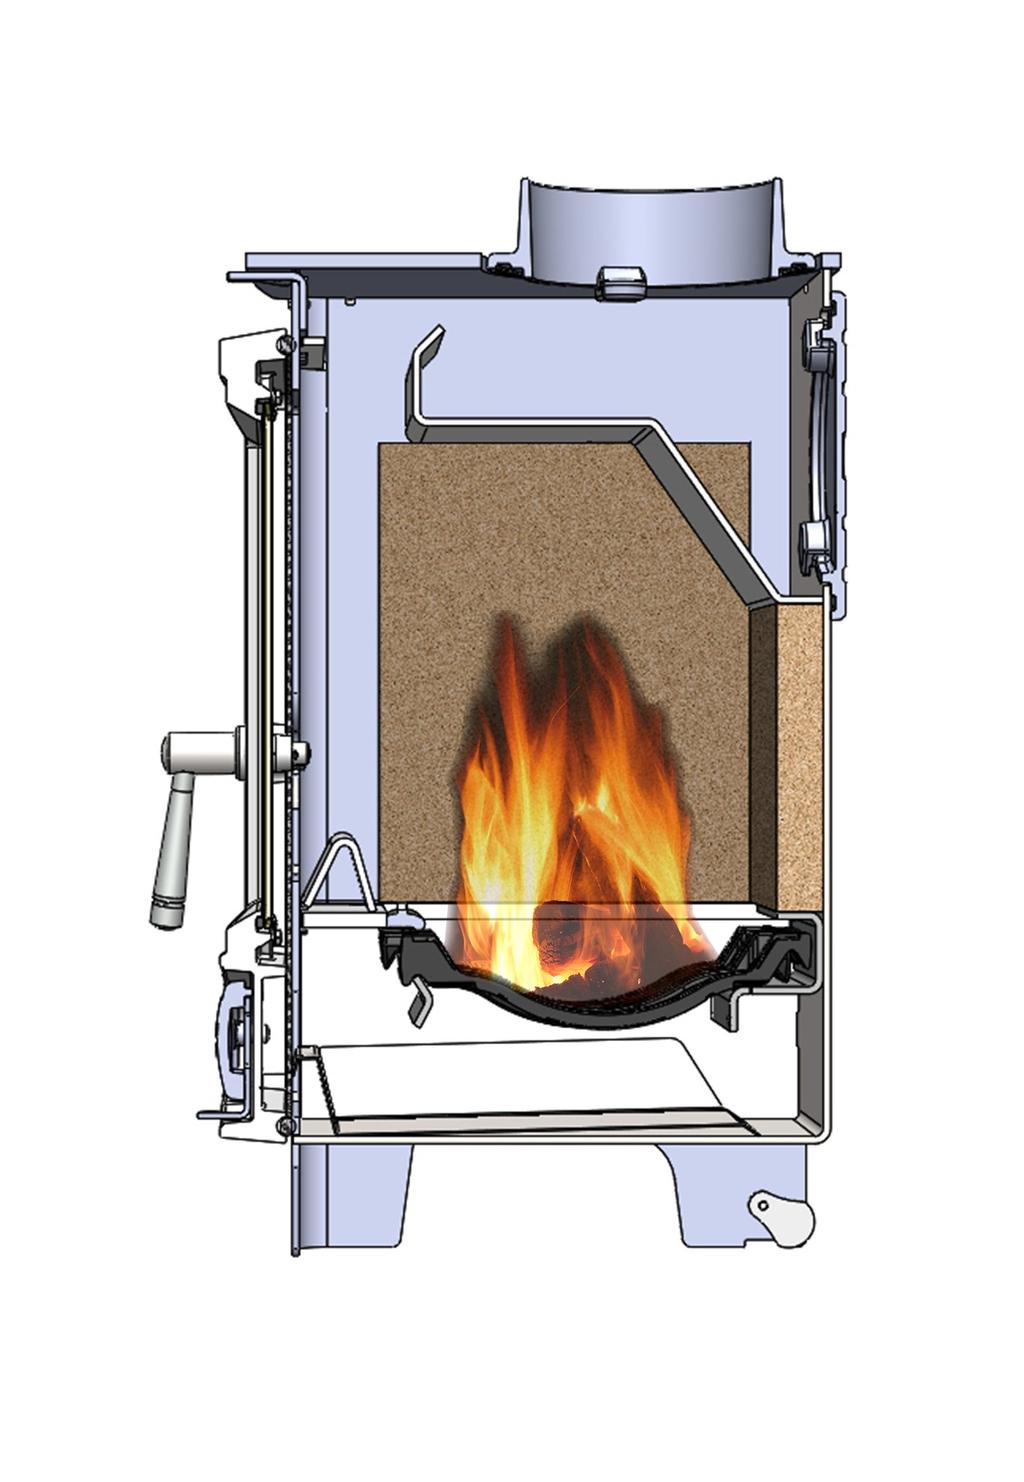 9 How heat is delivered by your stove Radiant Heat From Top Products Of Combustion Secondary Air Inlet Radiant Heat Through Glass Radiant Heat From Rear Primary Air Inlet Section Through Stove